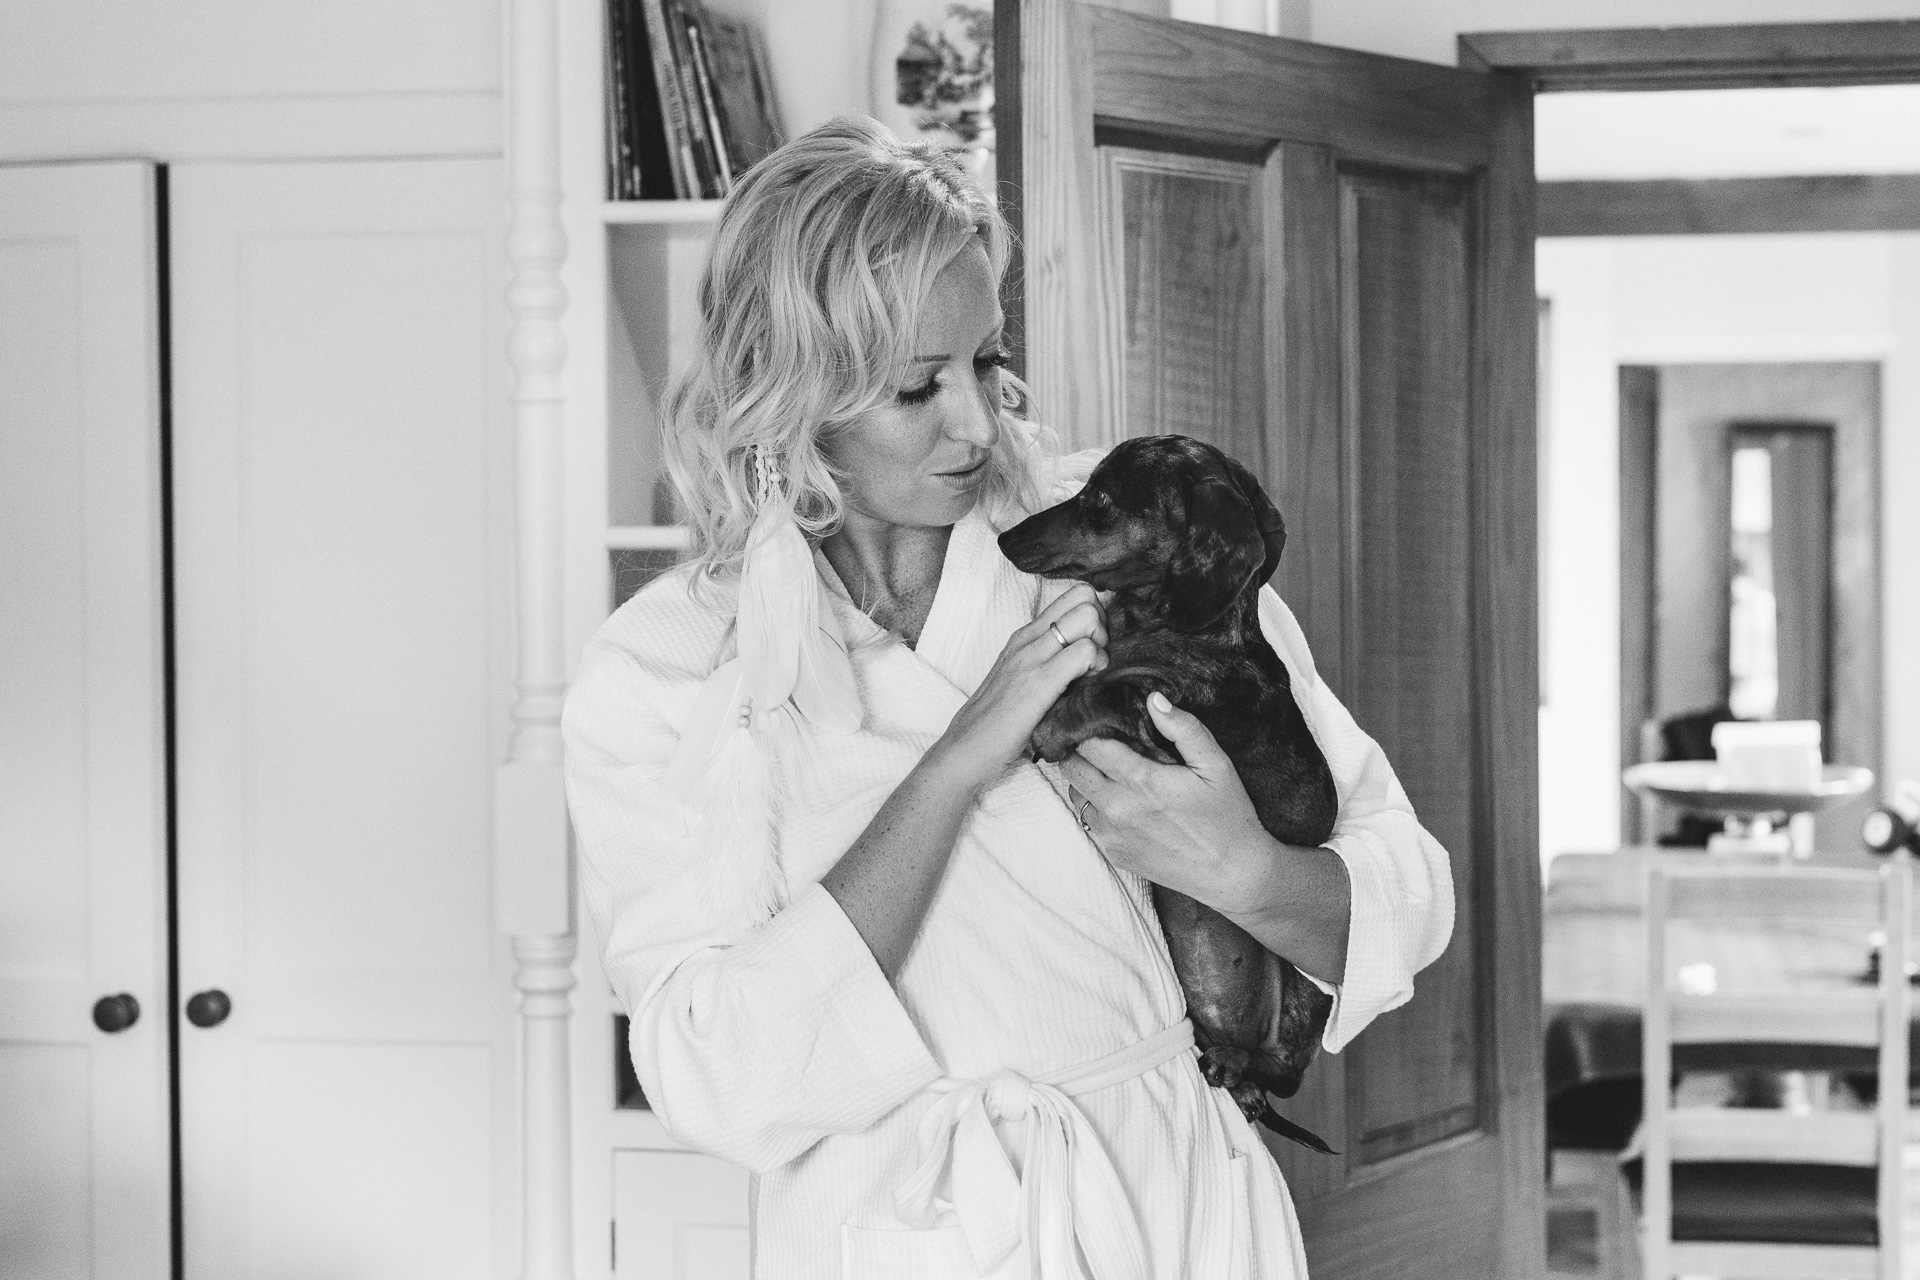 Bride-to-be with dachshund